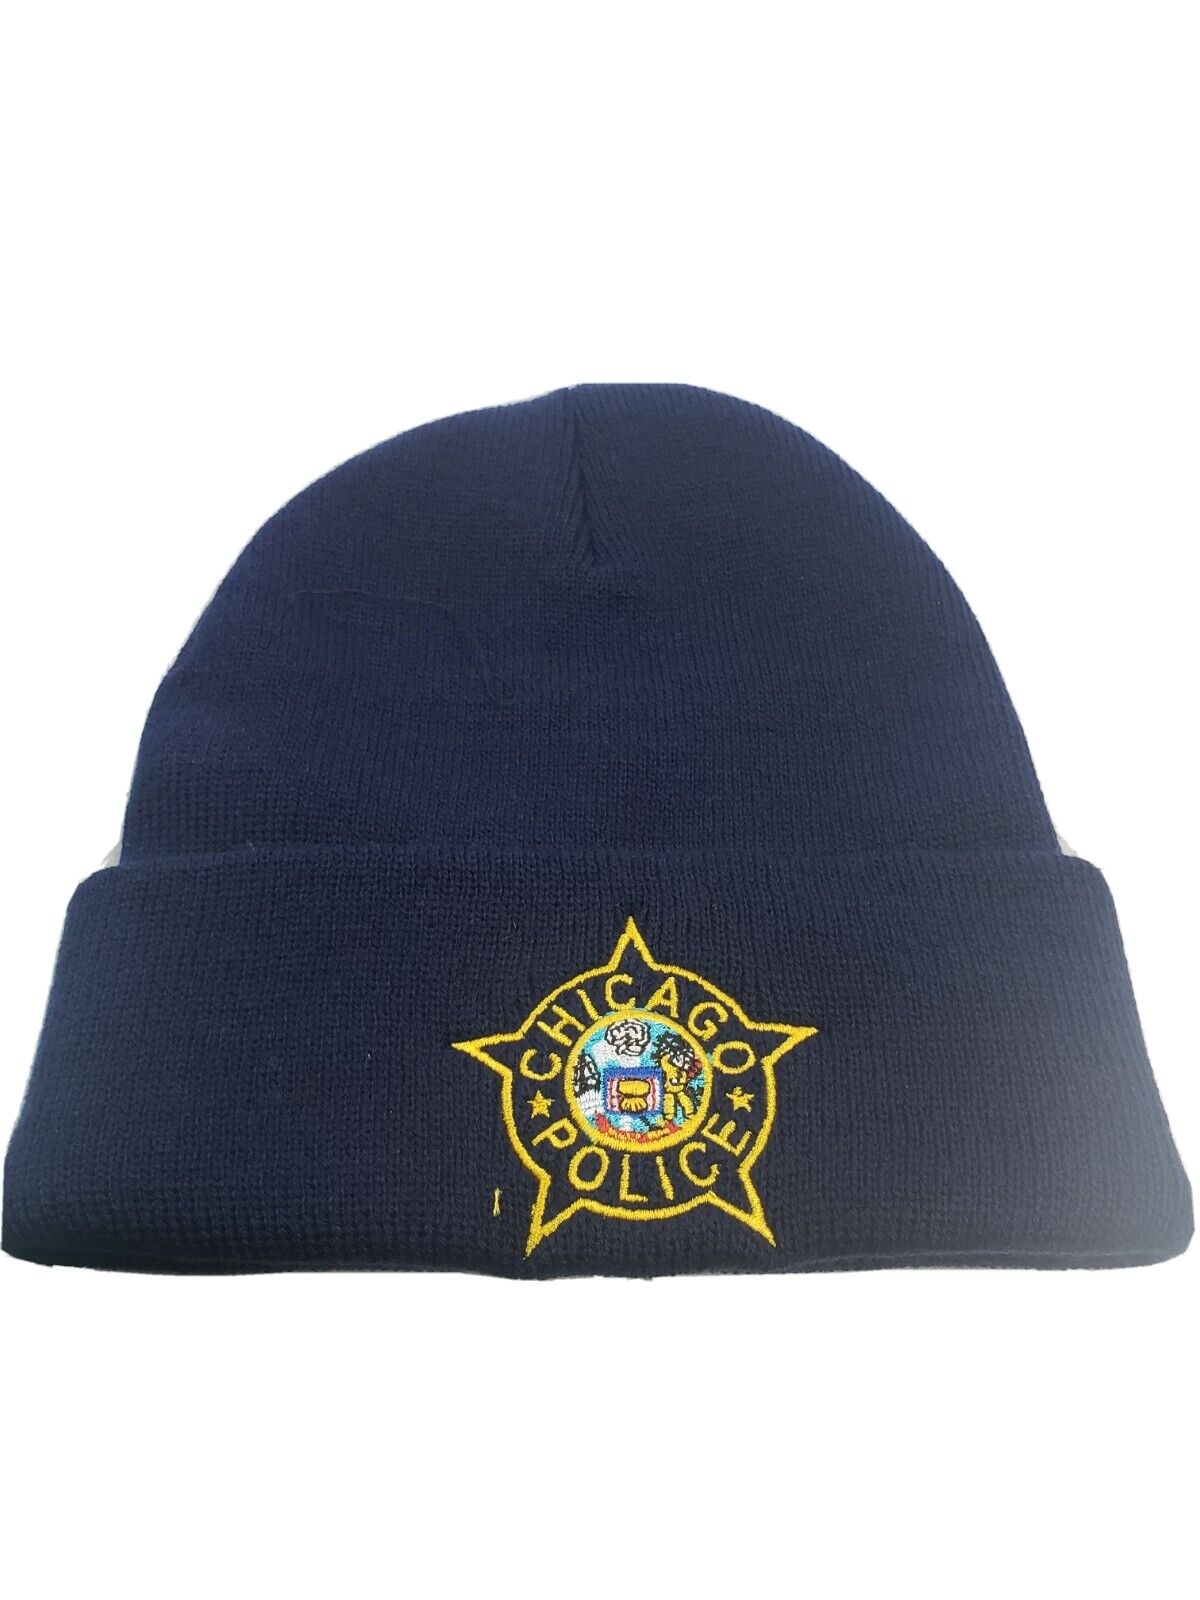 CHICAGO POLICE EMBROIDERED KNIT HAT